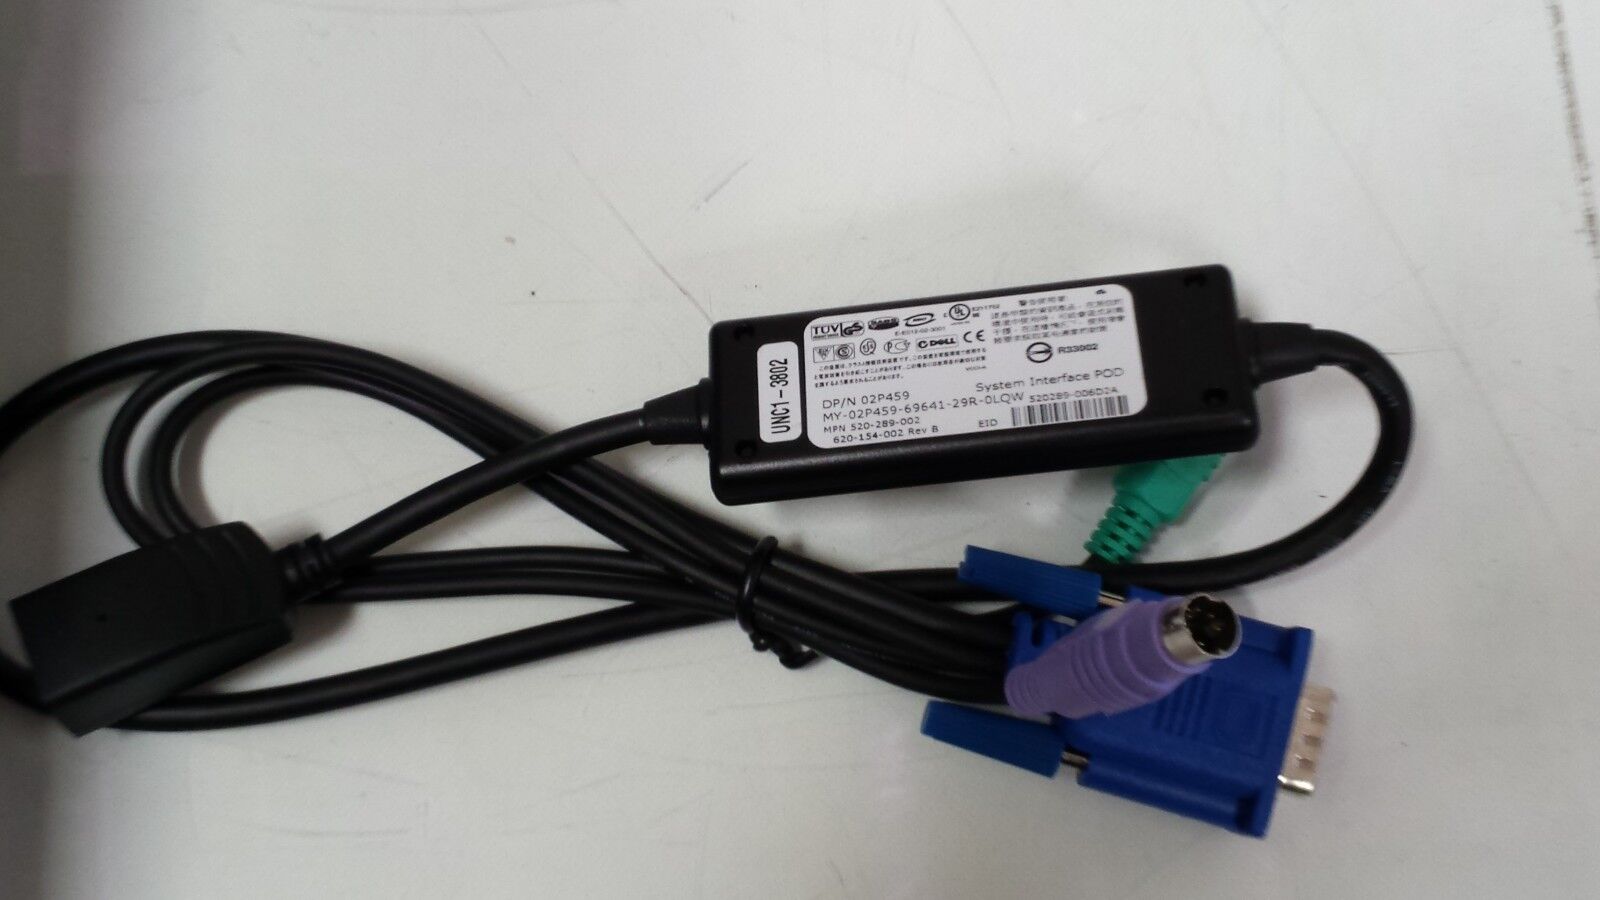 Dell 02P459 PS/2 System Interface POD SIP KVM Cable 520-289-002